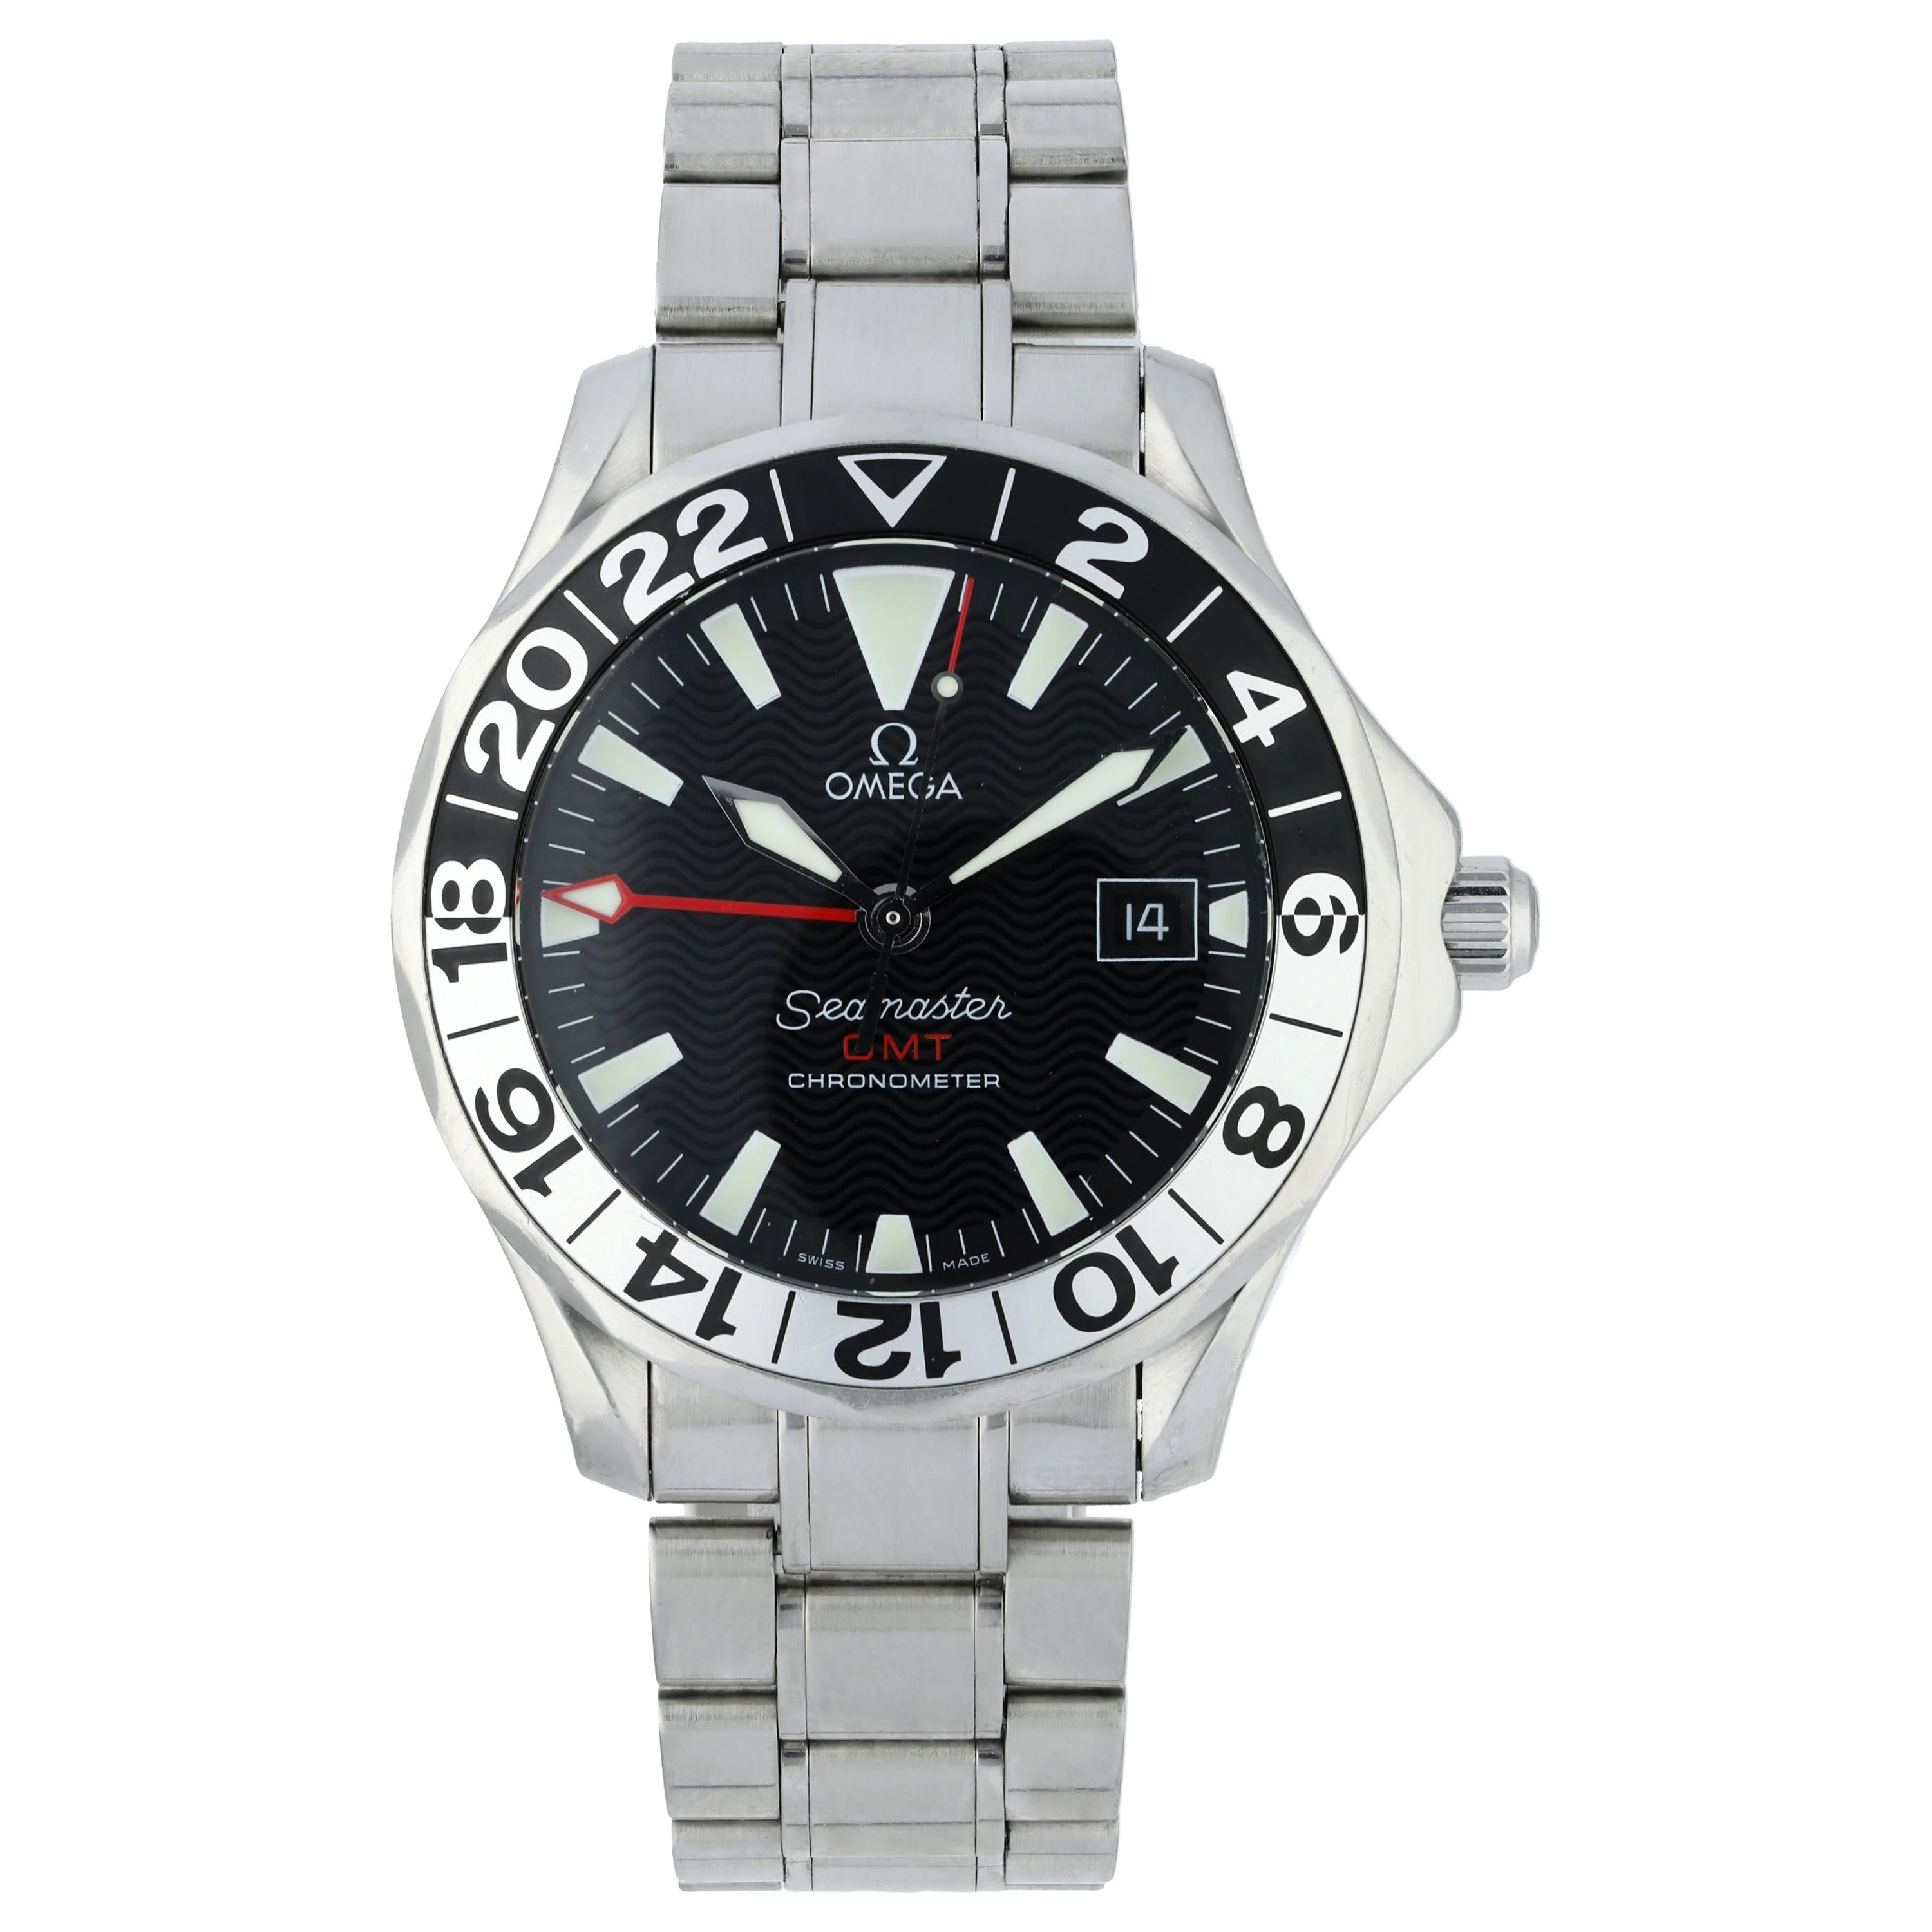 Omega Seamaster GMT 2534.50.00 50th Anniversary Edition Men's Watch For Sale